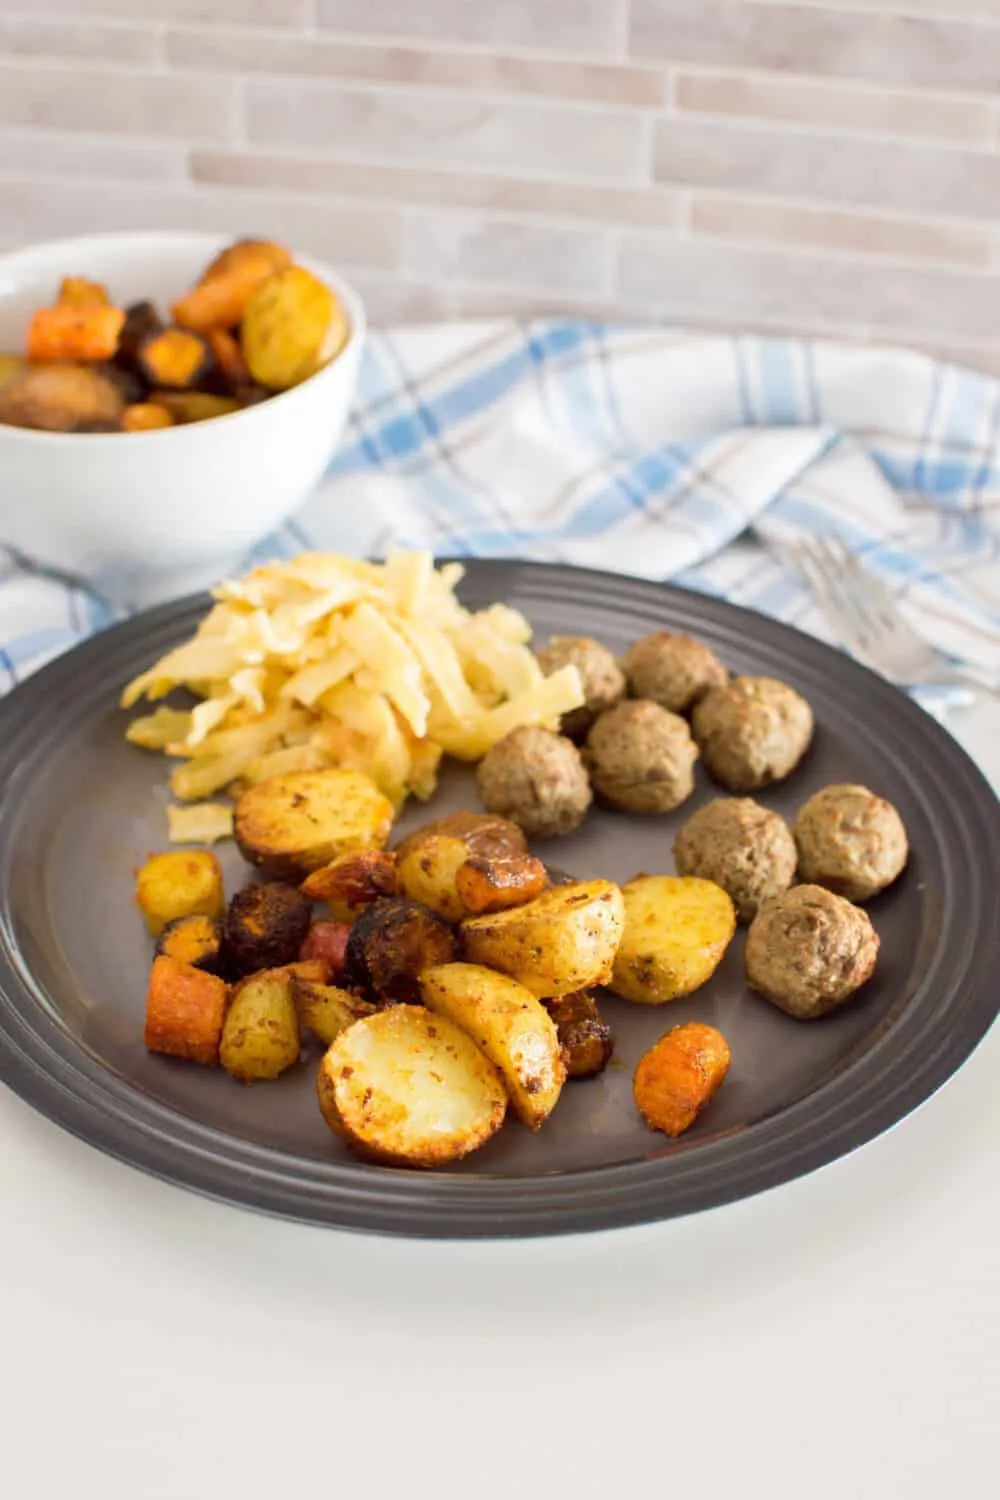 Roasted air fryer potatoes and carrots served on a grey plate with meatballs and pasta